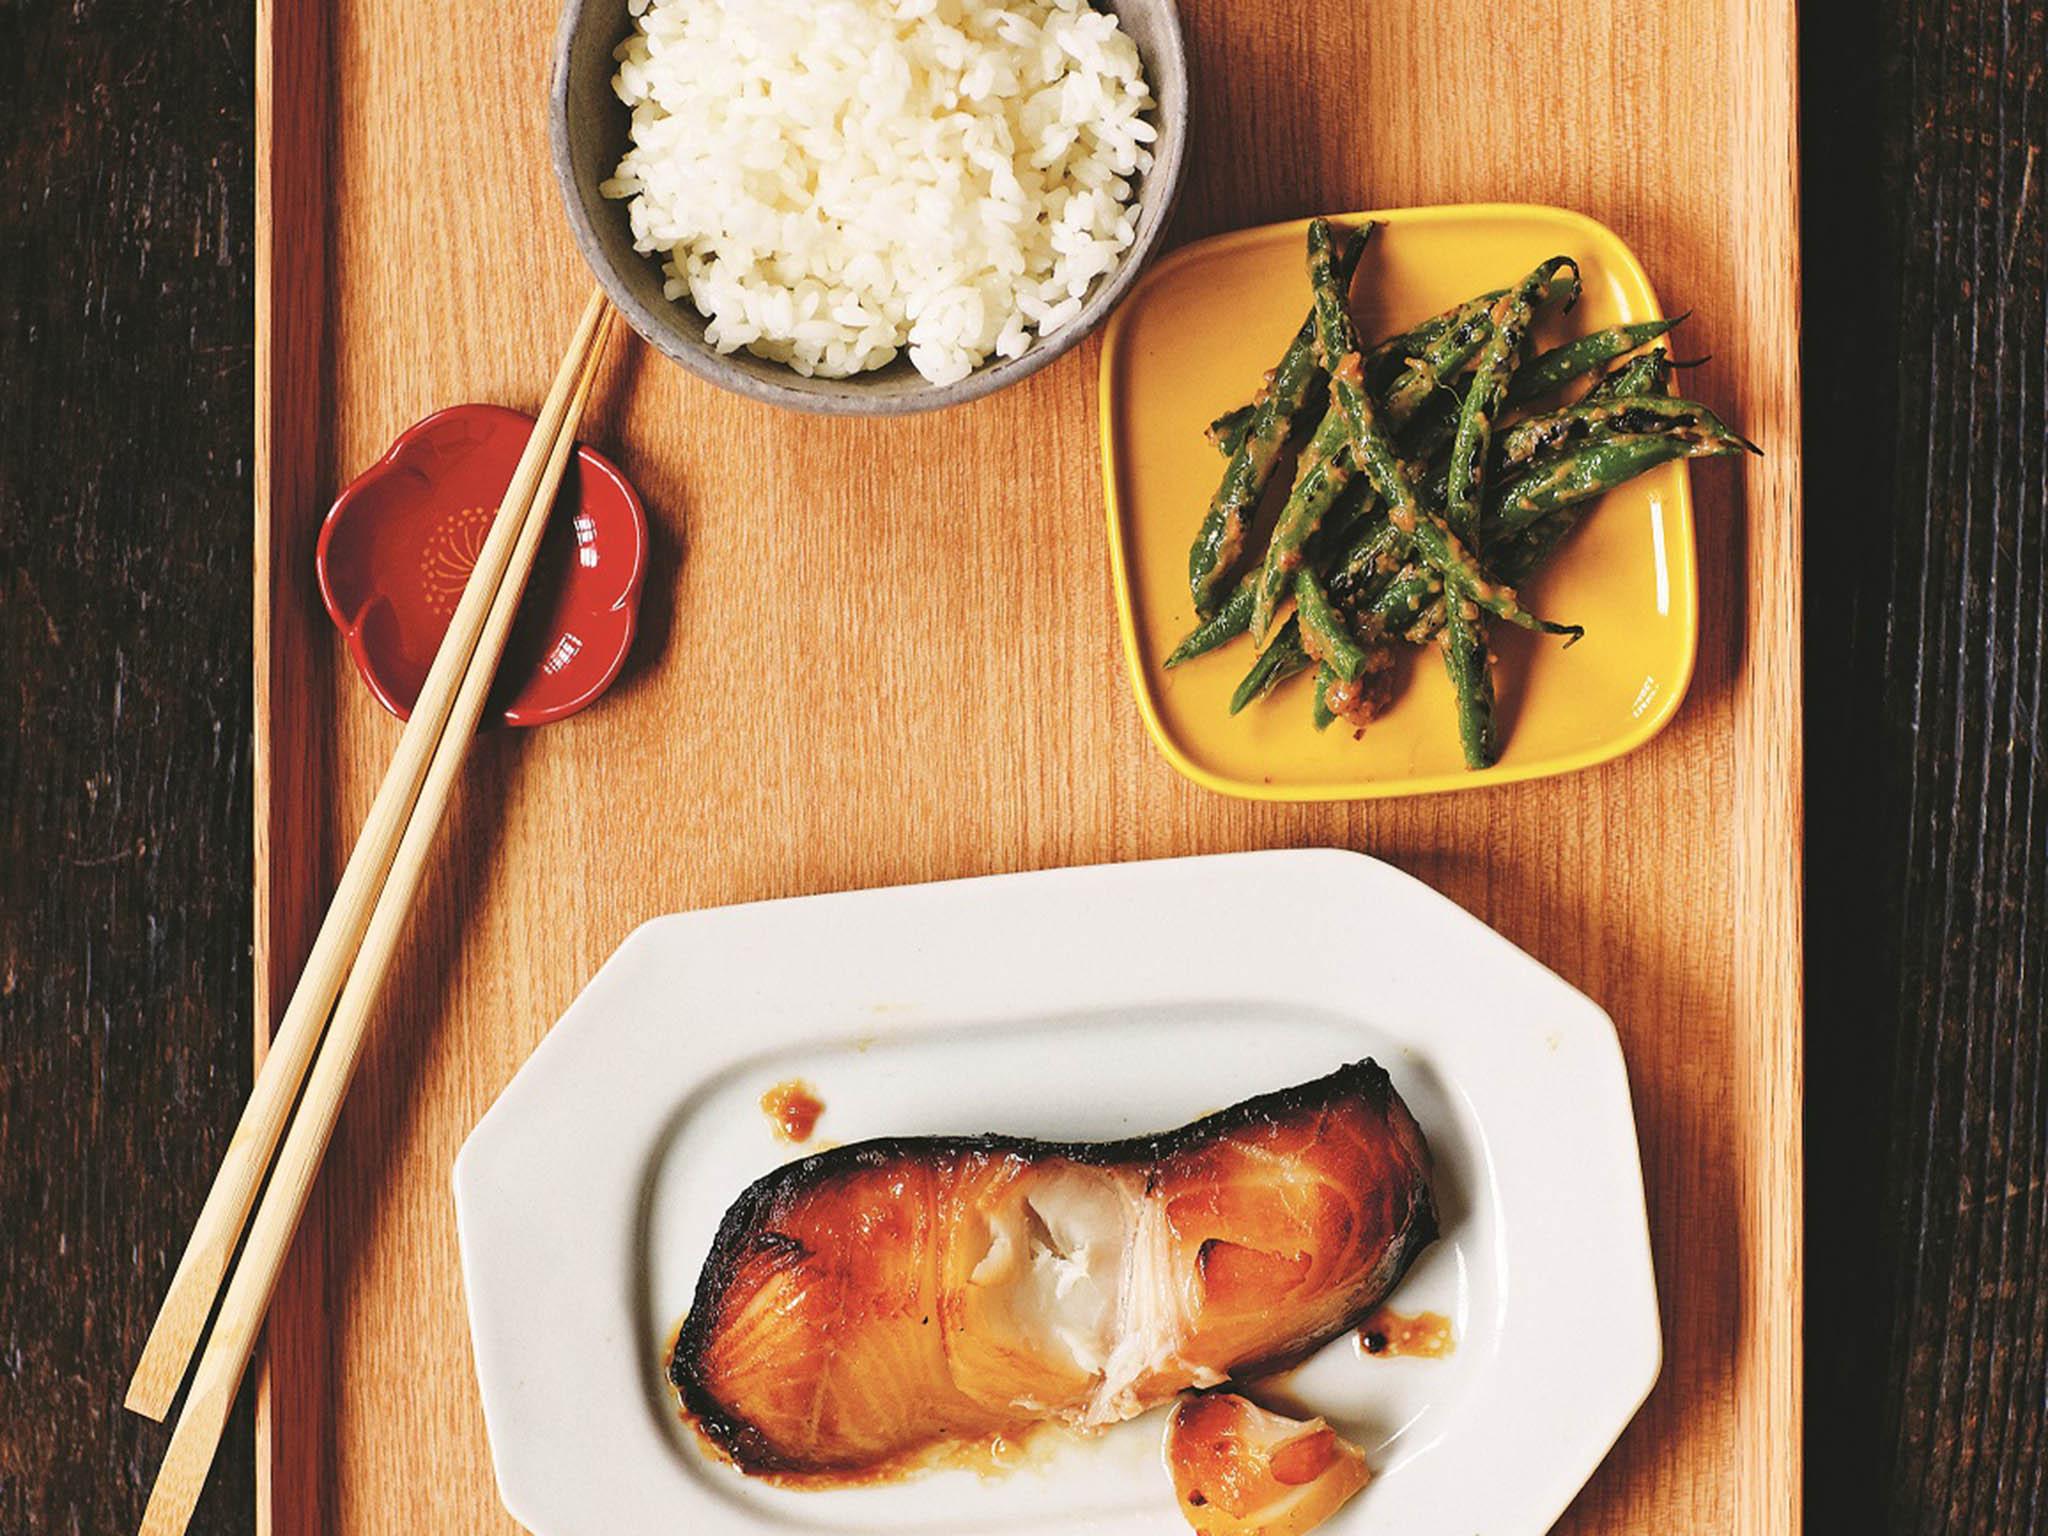 Despite looking like a show-off meal, the grilled saikyo miso black cod is actually very simple